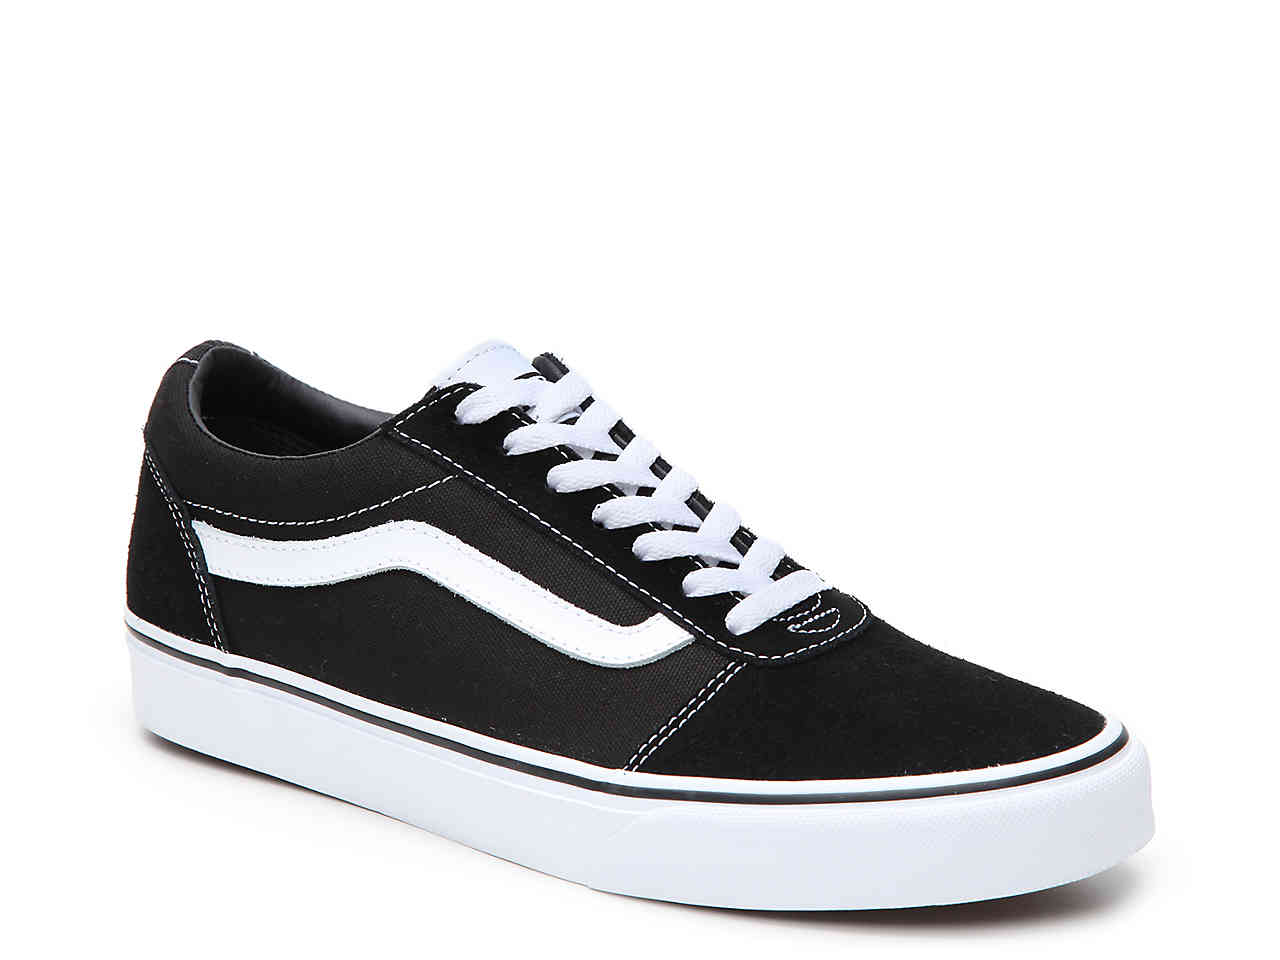 Vans sneakers are the best shoes for 